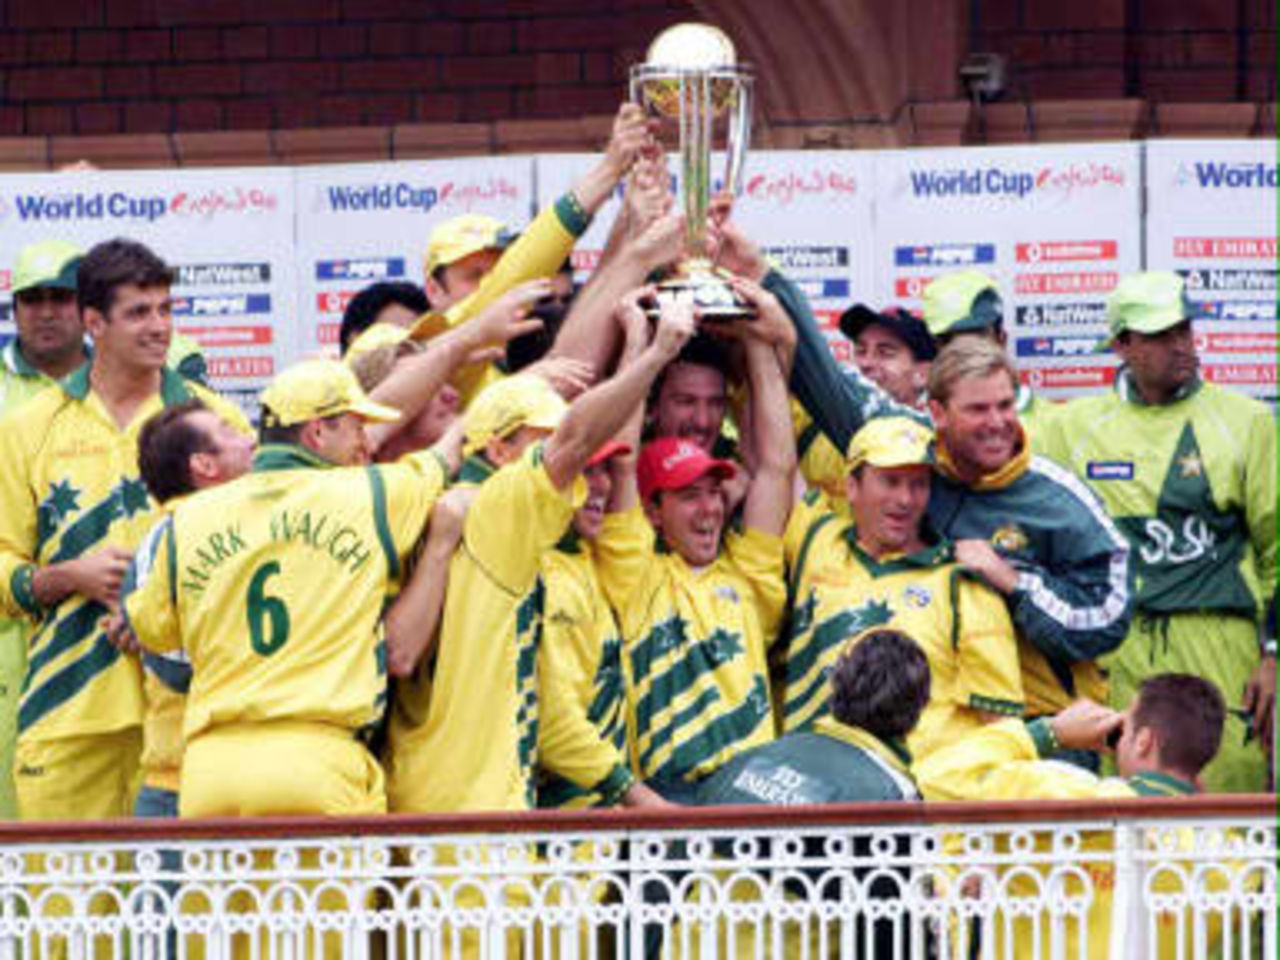 The victorious Australian cricket team lift the World Cup trophy after beating Pakistan by eight wickets in the finals at Lords in London, 20 June 1999.